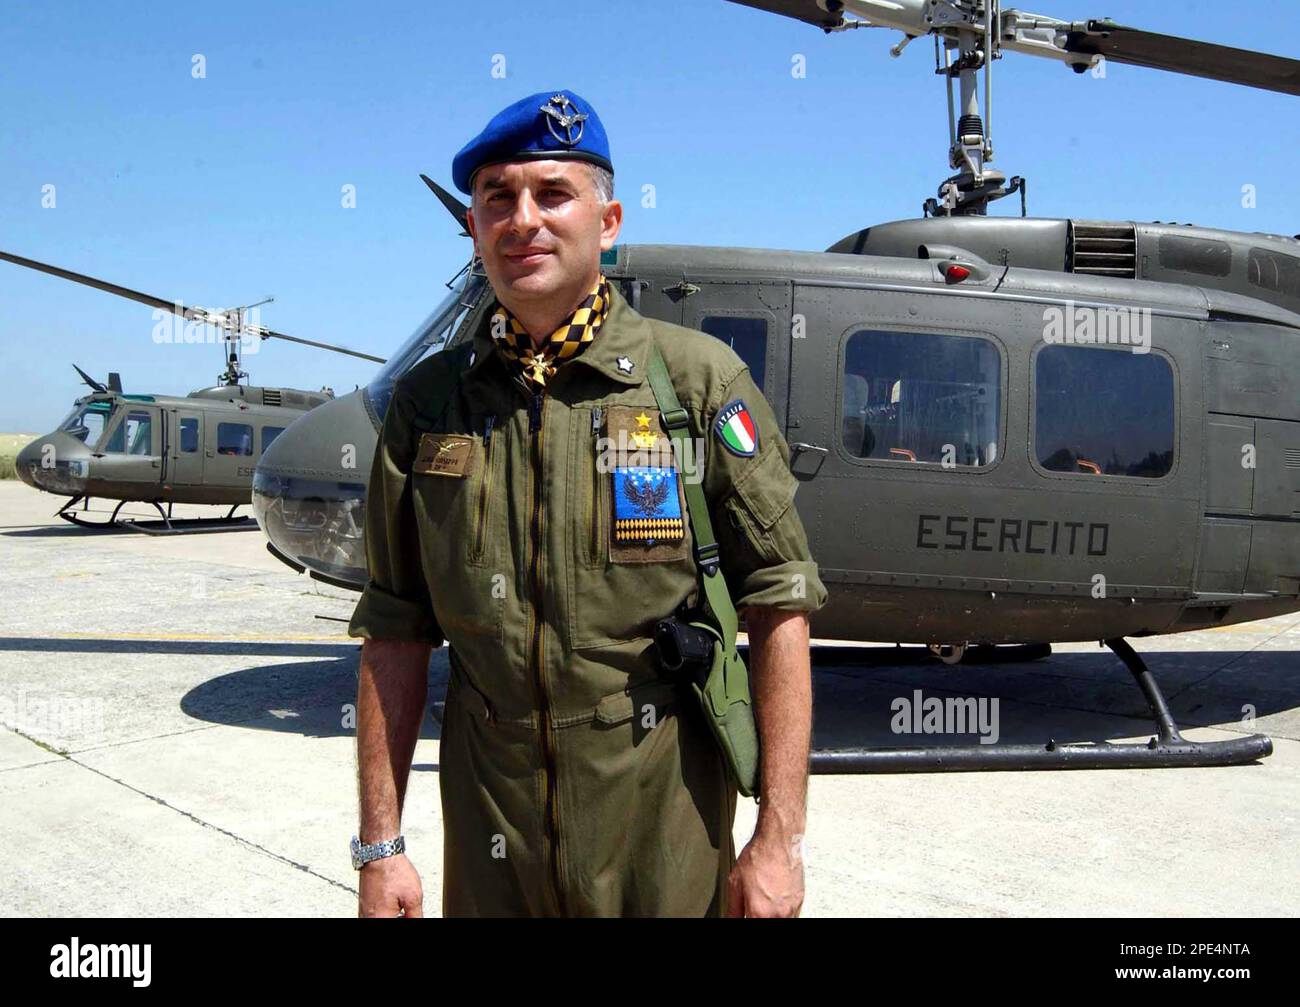 Lt. Col. Giuseppe Lima, 39, is seen in at a military airport in Rimini, Italy, in this undated photo. Col. Lima, from Rome, one of the four soldiers killed when an Italian military AB 412 helicopter crashed overnight about 13 km (8 miles) southeast of Nasiryah, the southern Iraqi city where Italy's 3000 troops are based, the Italian military said. (AP Photo/Venanzio Raggi) Stock Photo